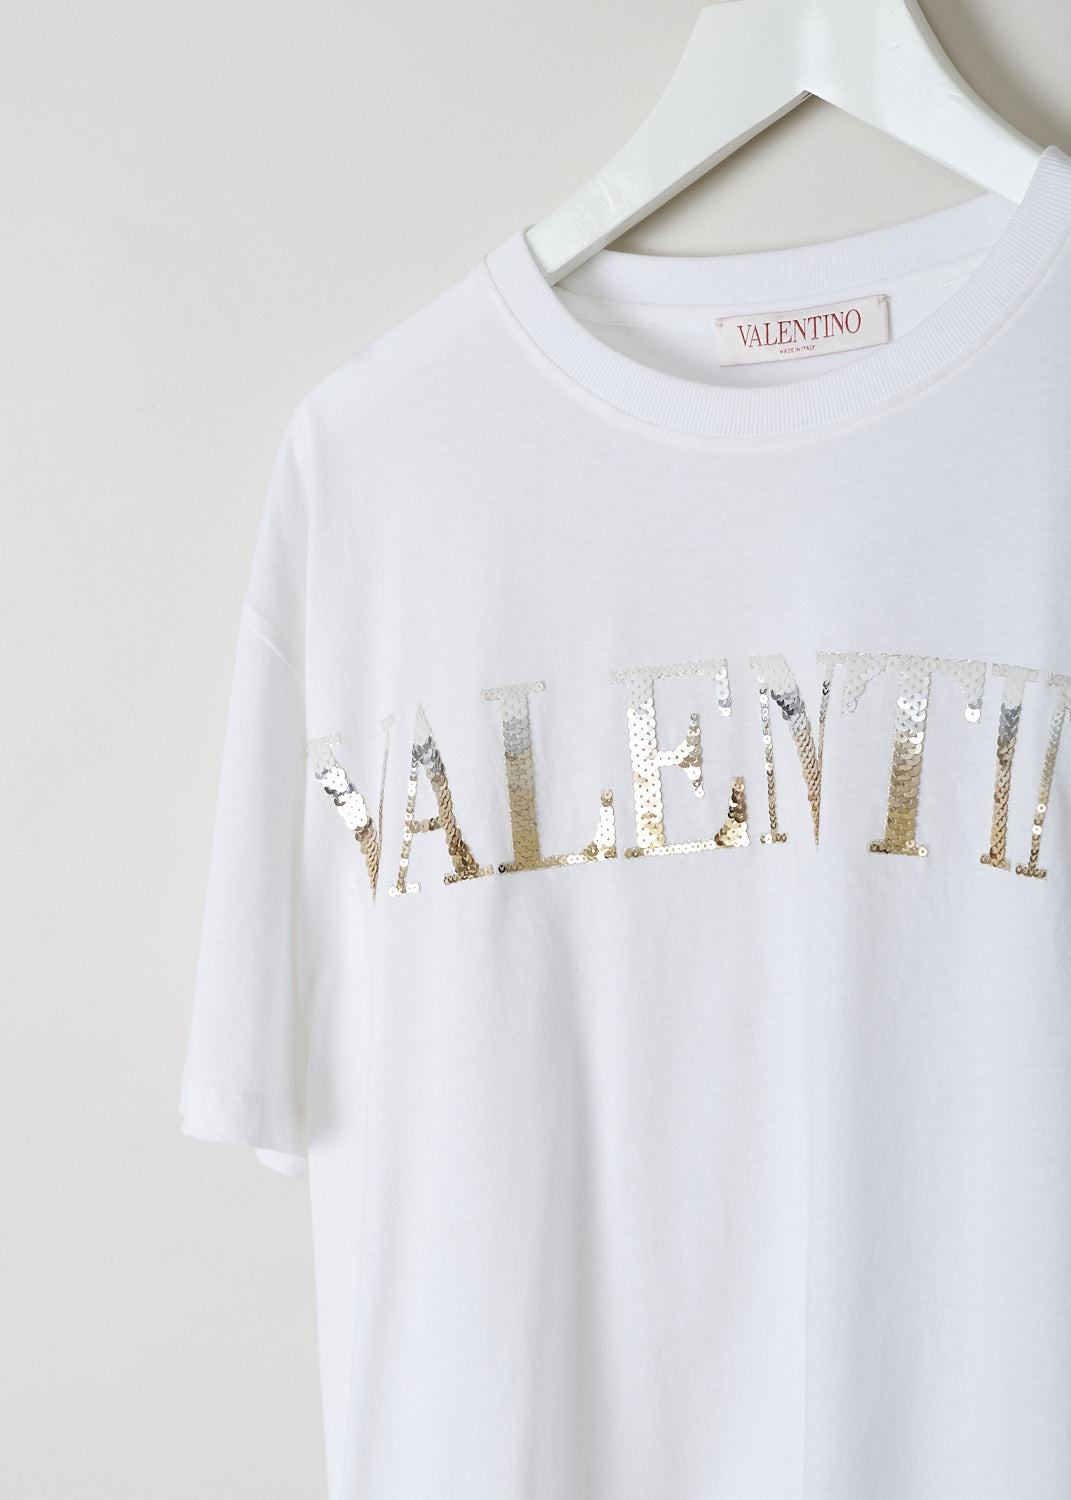 VALENTINO, WHITE T-SHIRT WITH SEQUIN LETTERING, 1B3MG18W7DN_0BO, White, Detail, This white T-shirt has the brand's lettering in ombre sequins across the chest. The shirt has a round neckline and short sleeves. 
